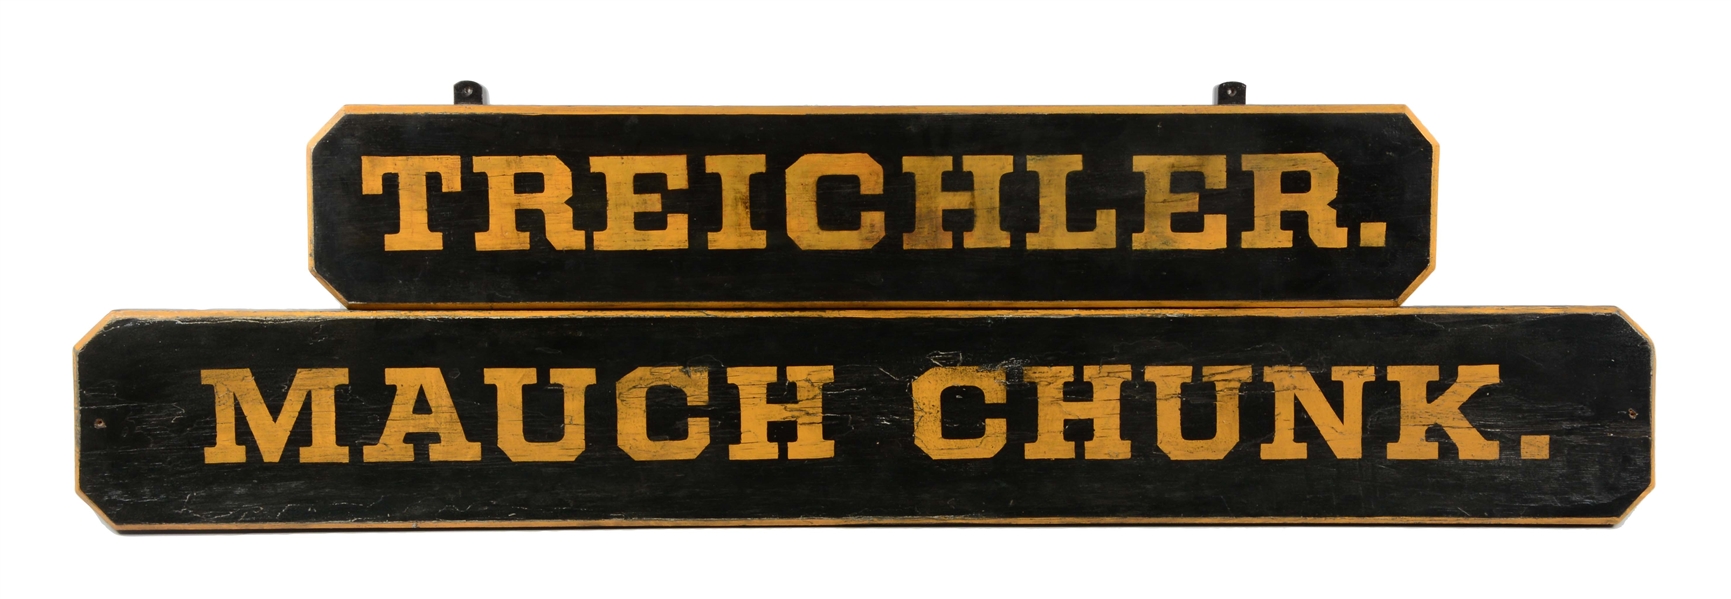 LOT OF 2: MAUCH CHUNCK & TREDICHLER WOODEN SIGNS.